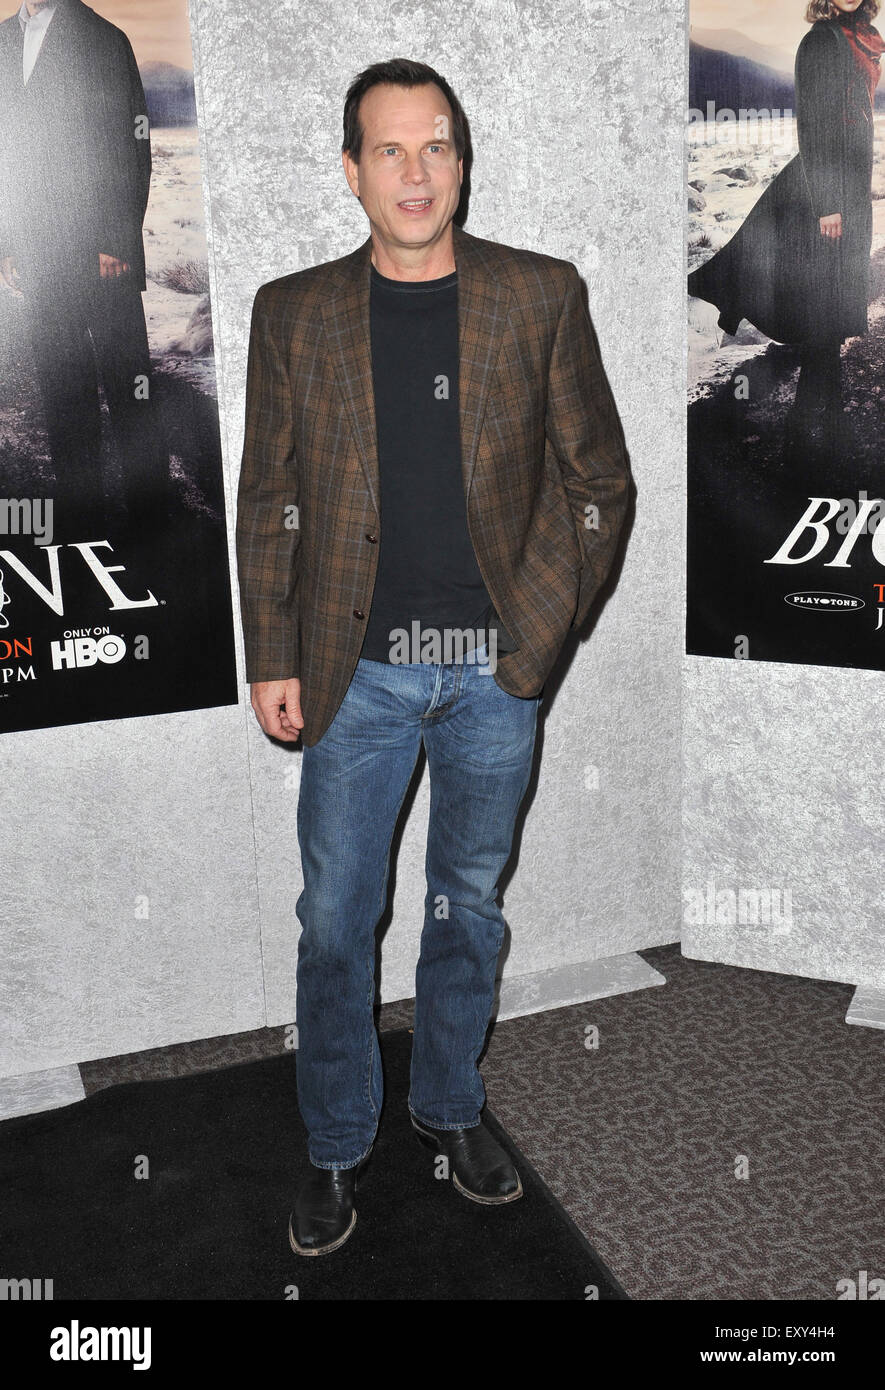 LOS ANGELES, CA - JANUARY 12, 2011: Bill Paxton at the season five premiere of his TV series "Big Love" at the Directors Guild Theatre, Los Angeles. Stock Photo